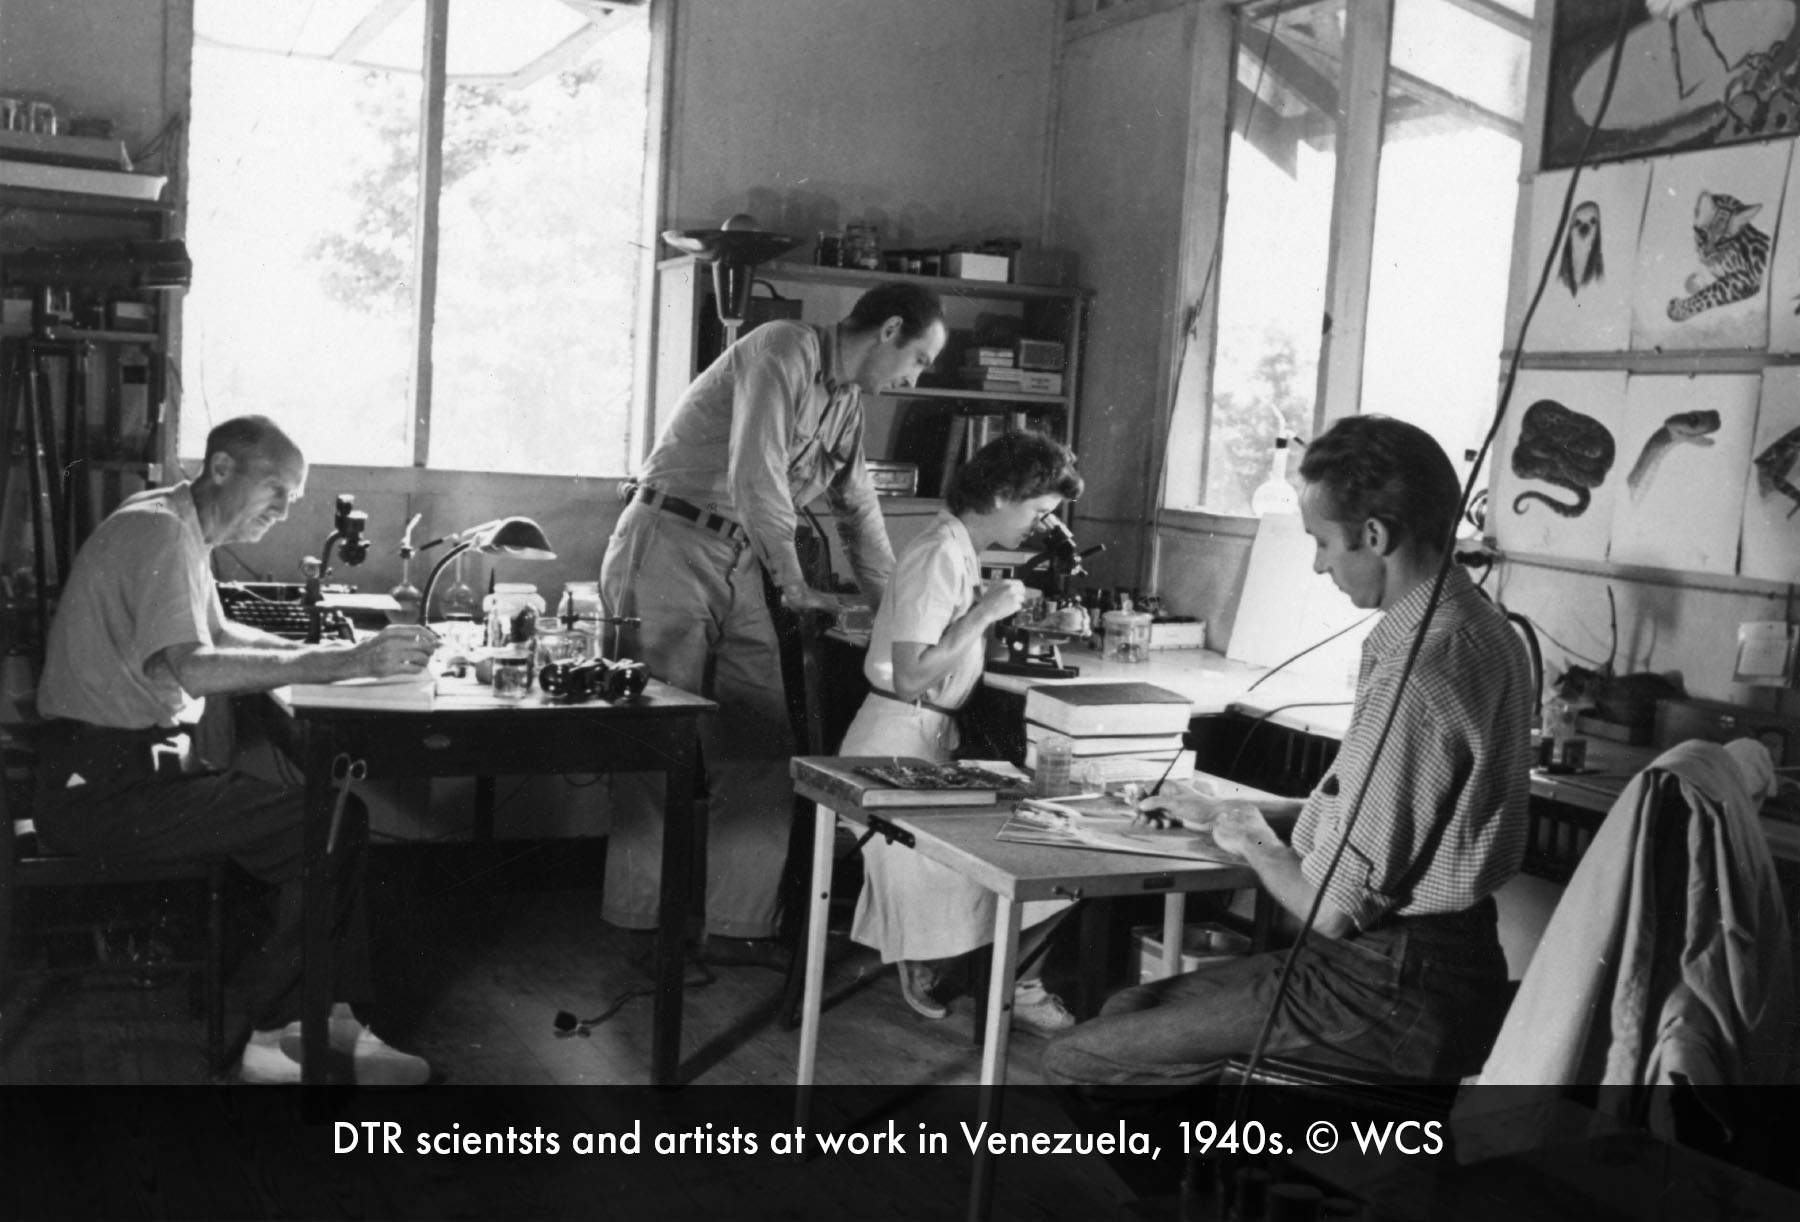 DTR scientists and artists at work in Venezuela, 1940s. © WCS